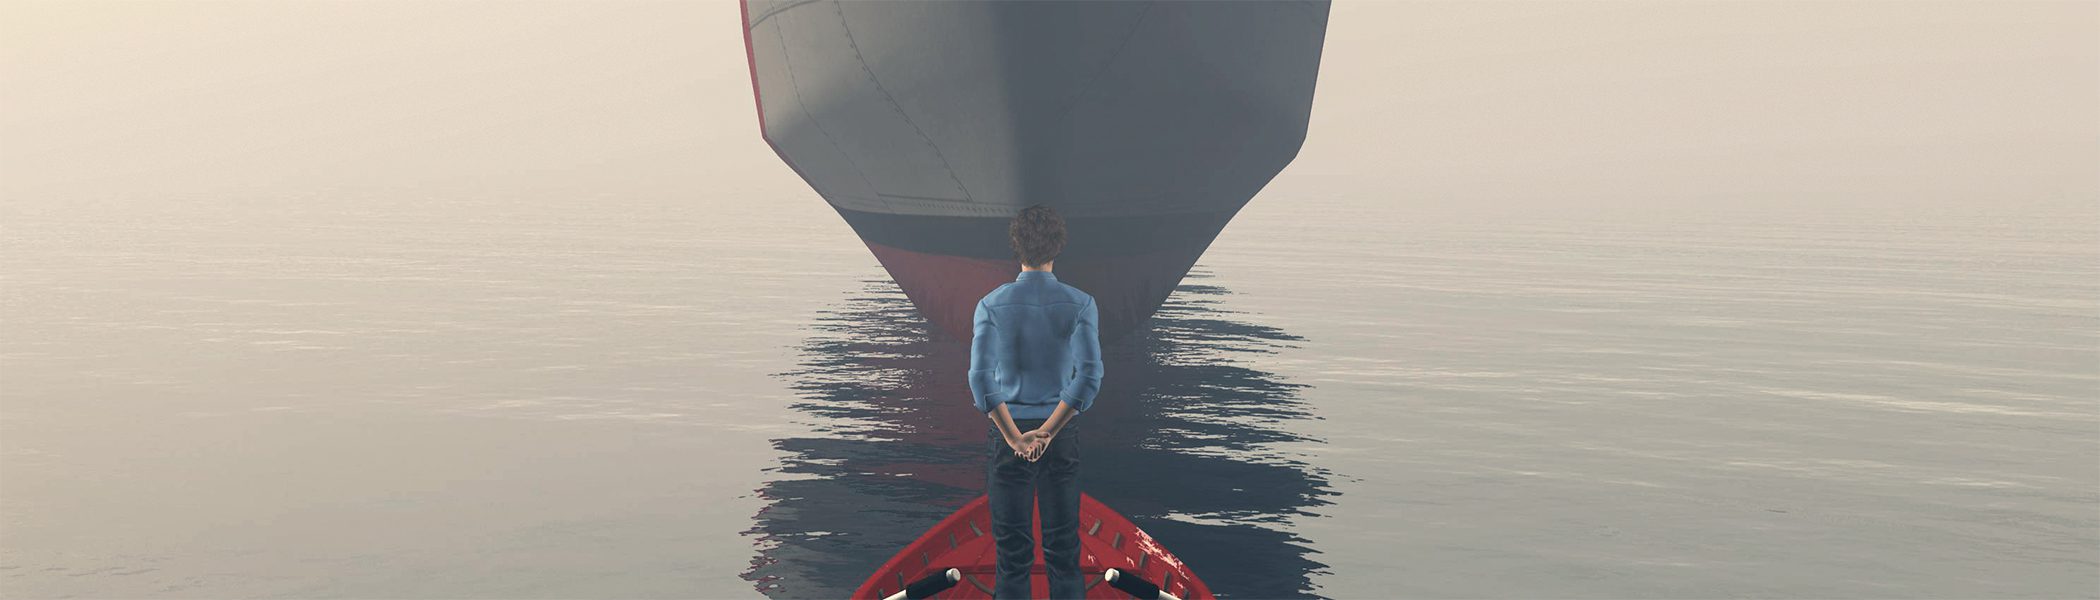 A person stands on a small boat, facing the change of the large ship ahead.